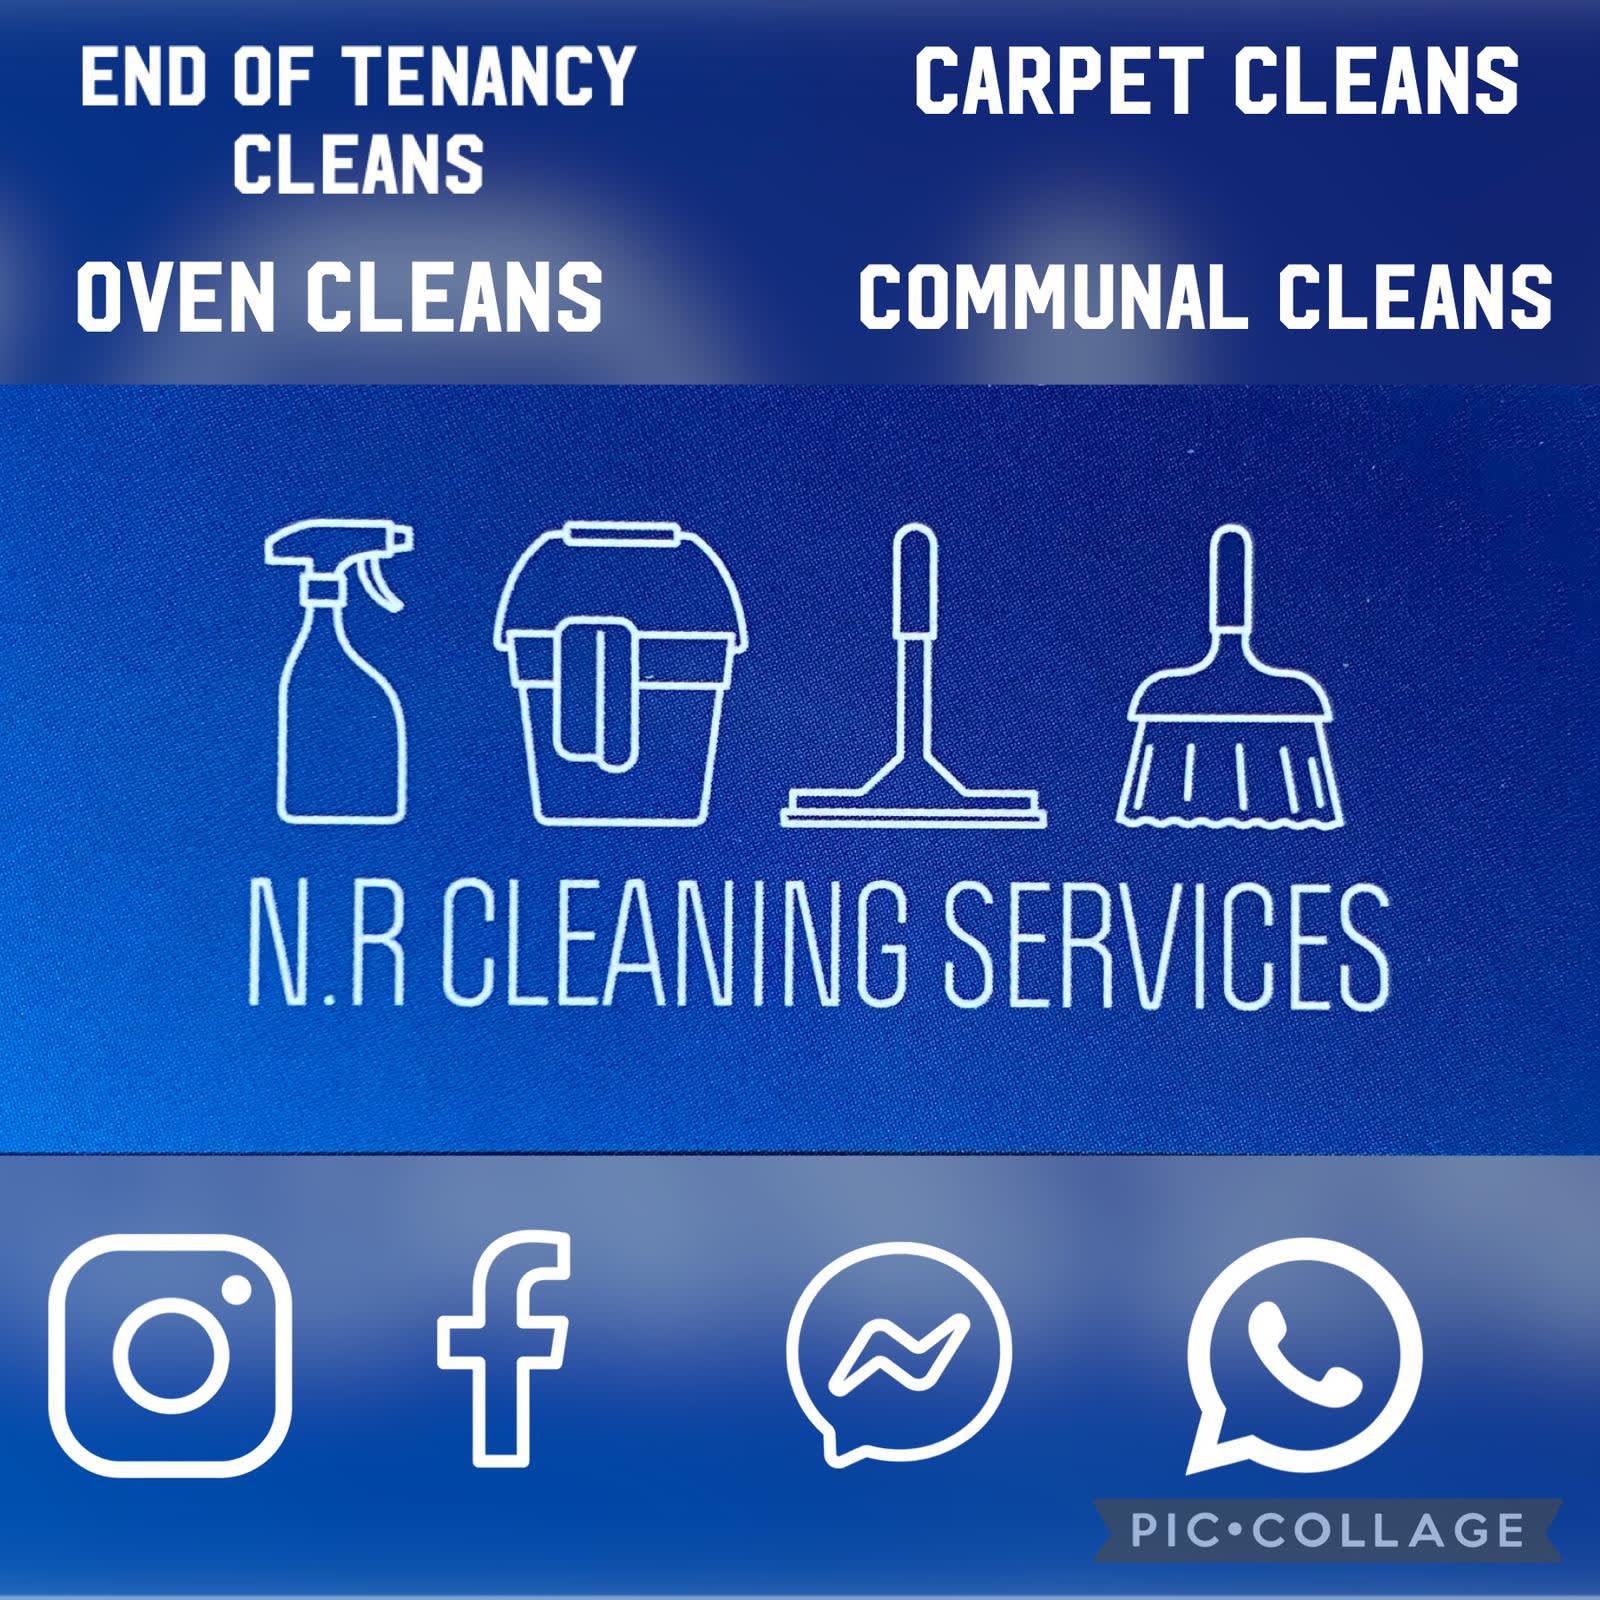 Images N.R Cleaning Services